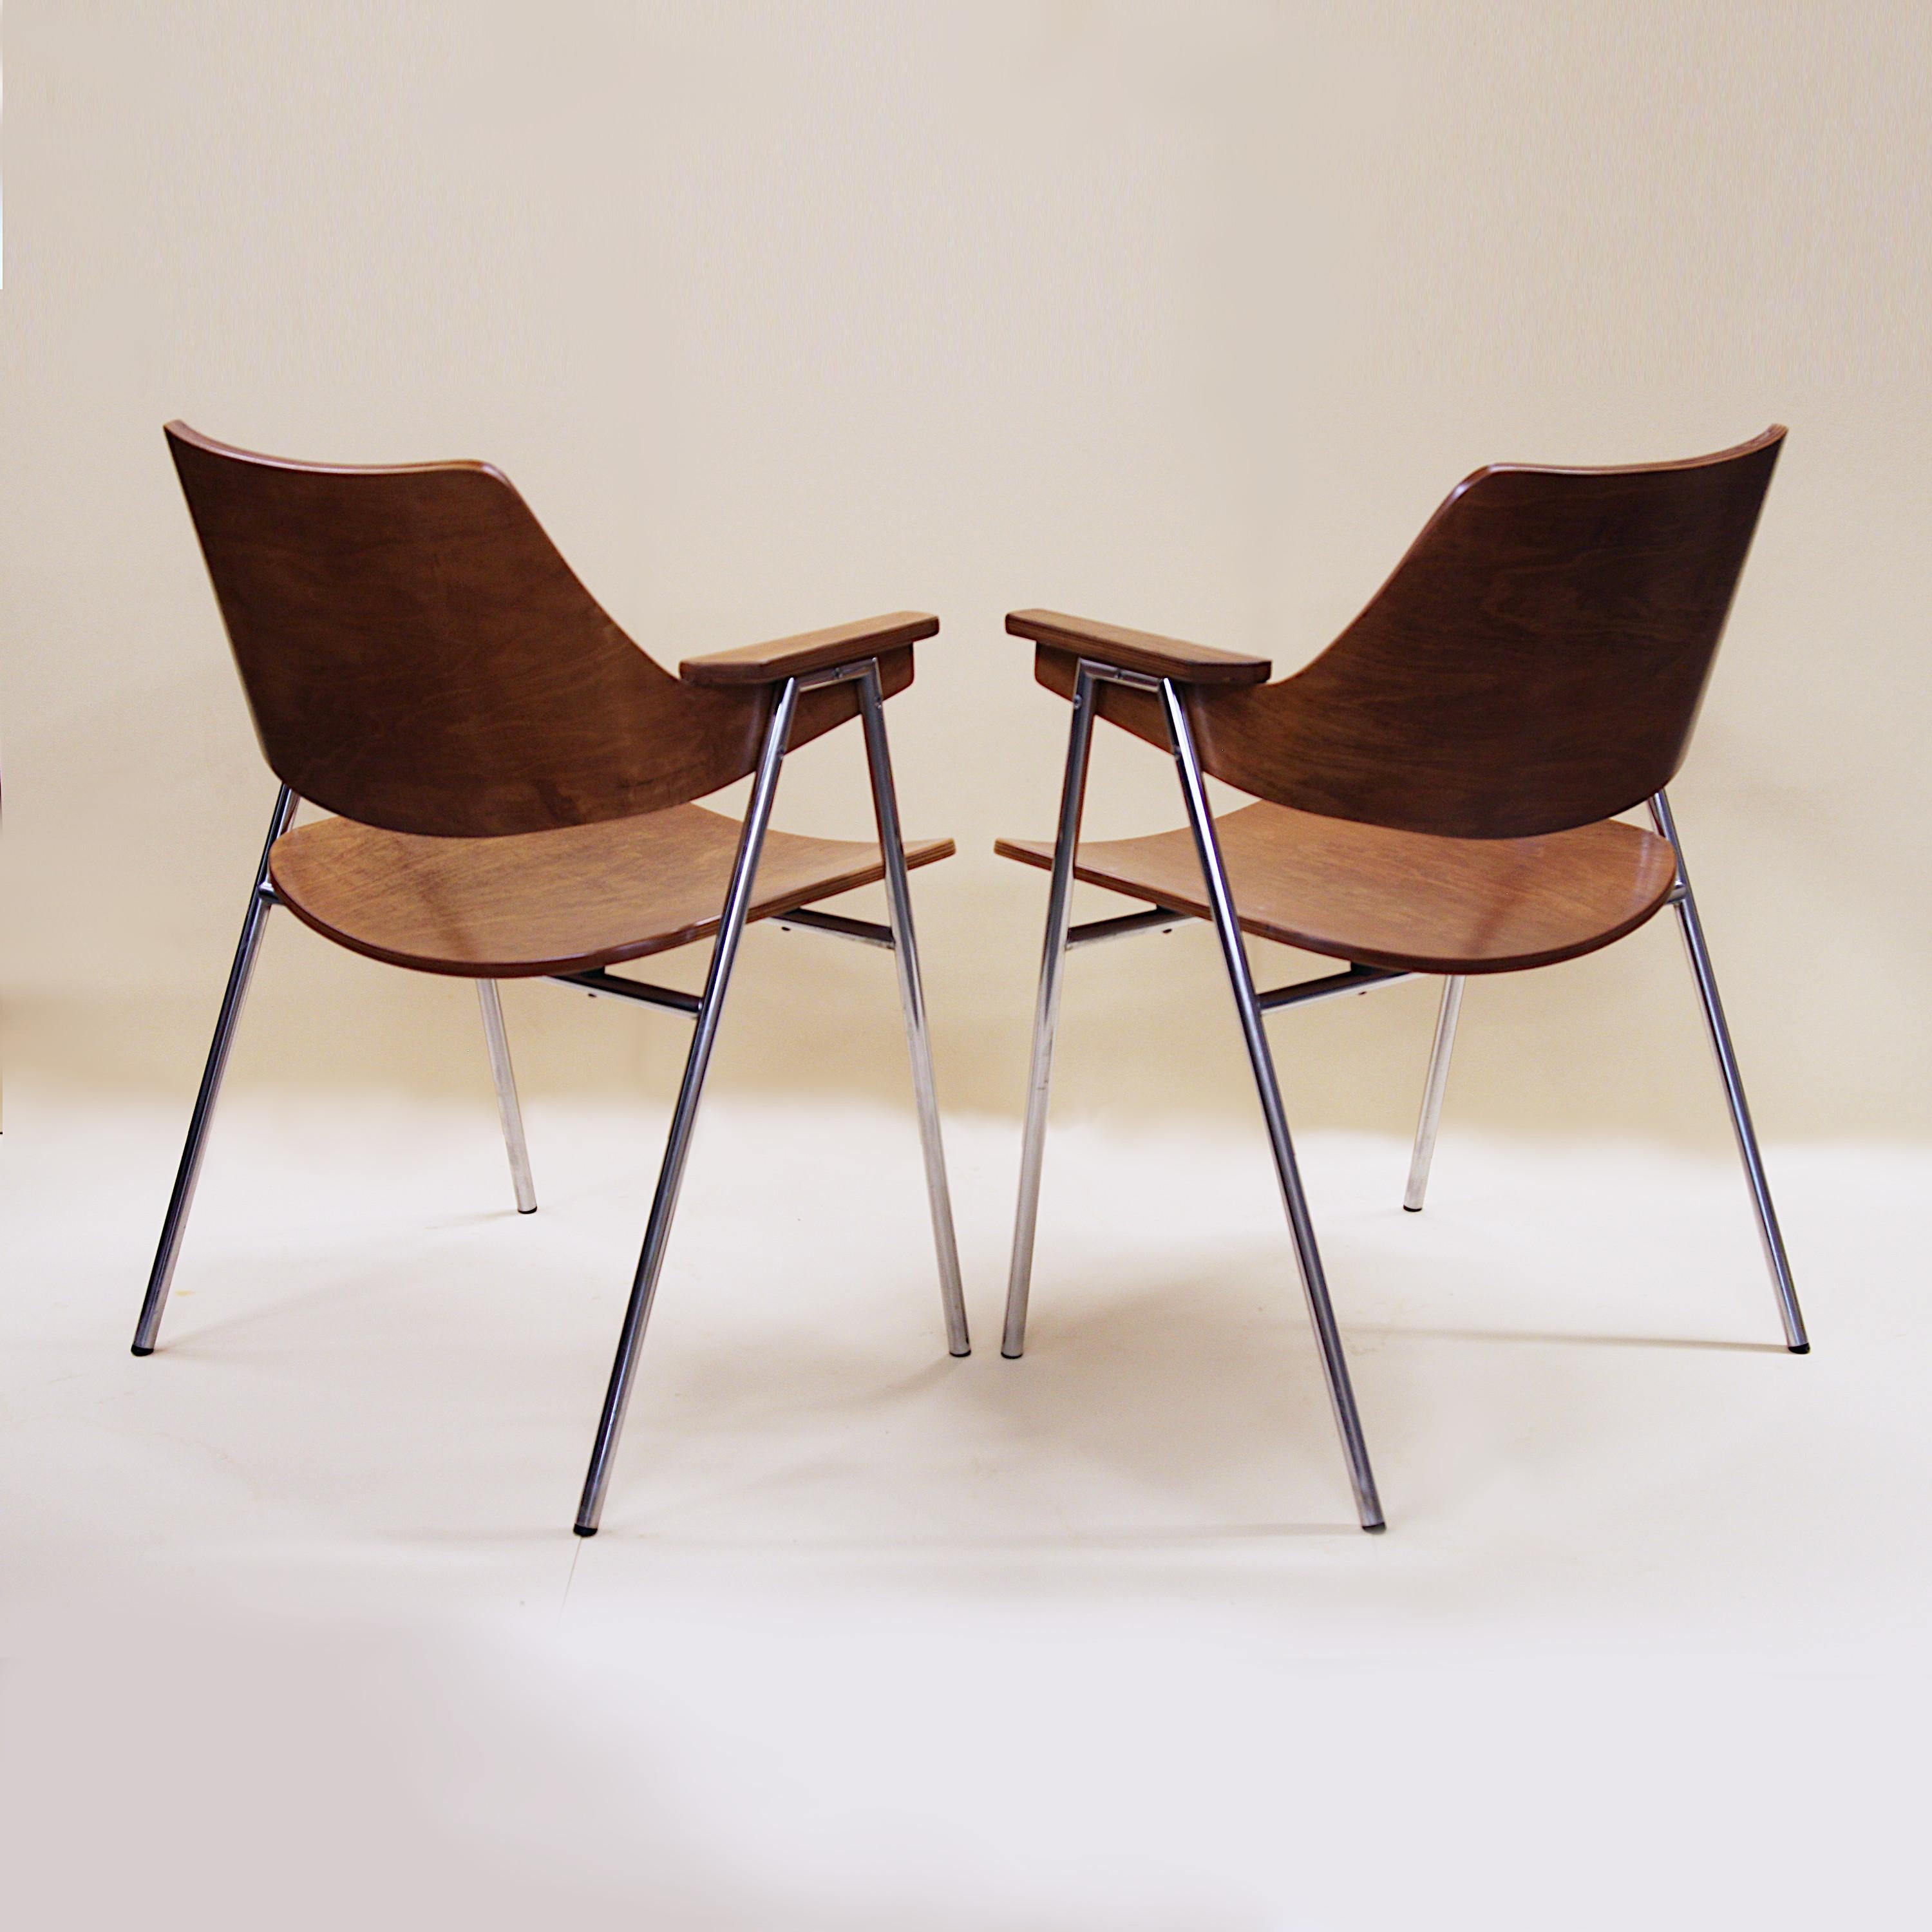 Mid-Century Modern Rare Pair of Mid Century Modern Bent Plywood Chrome Chairs by Hanno Von Gustedt